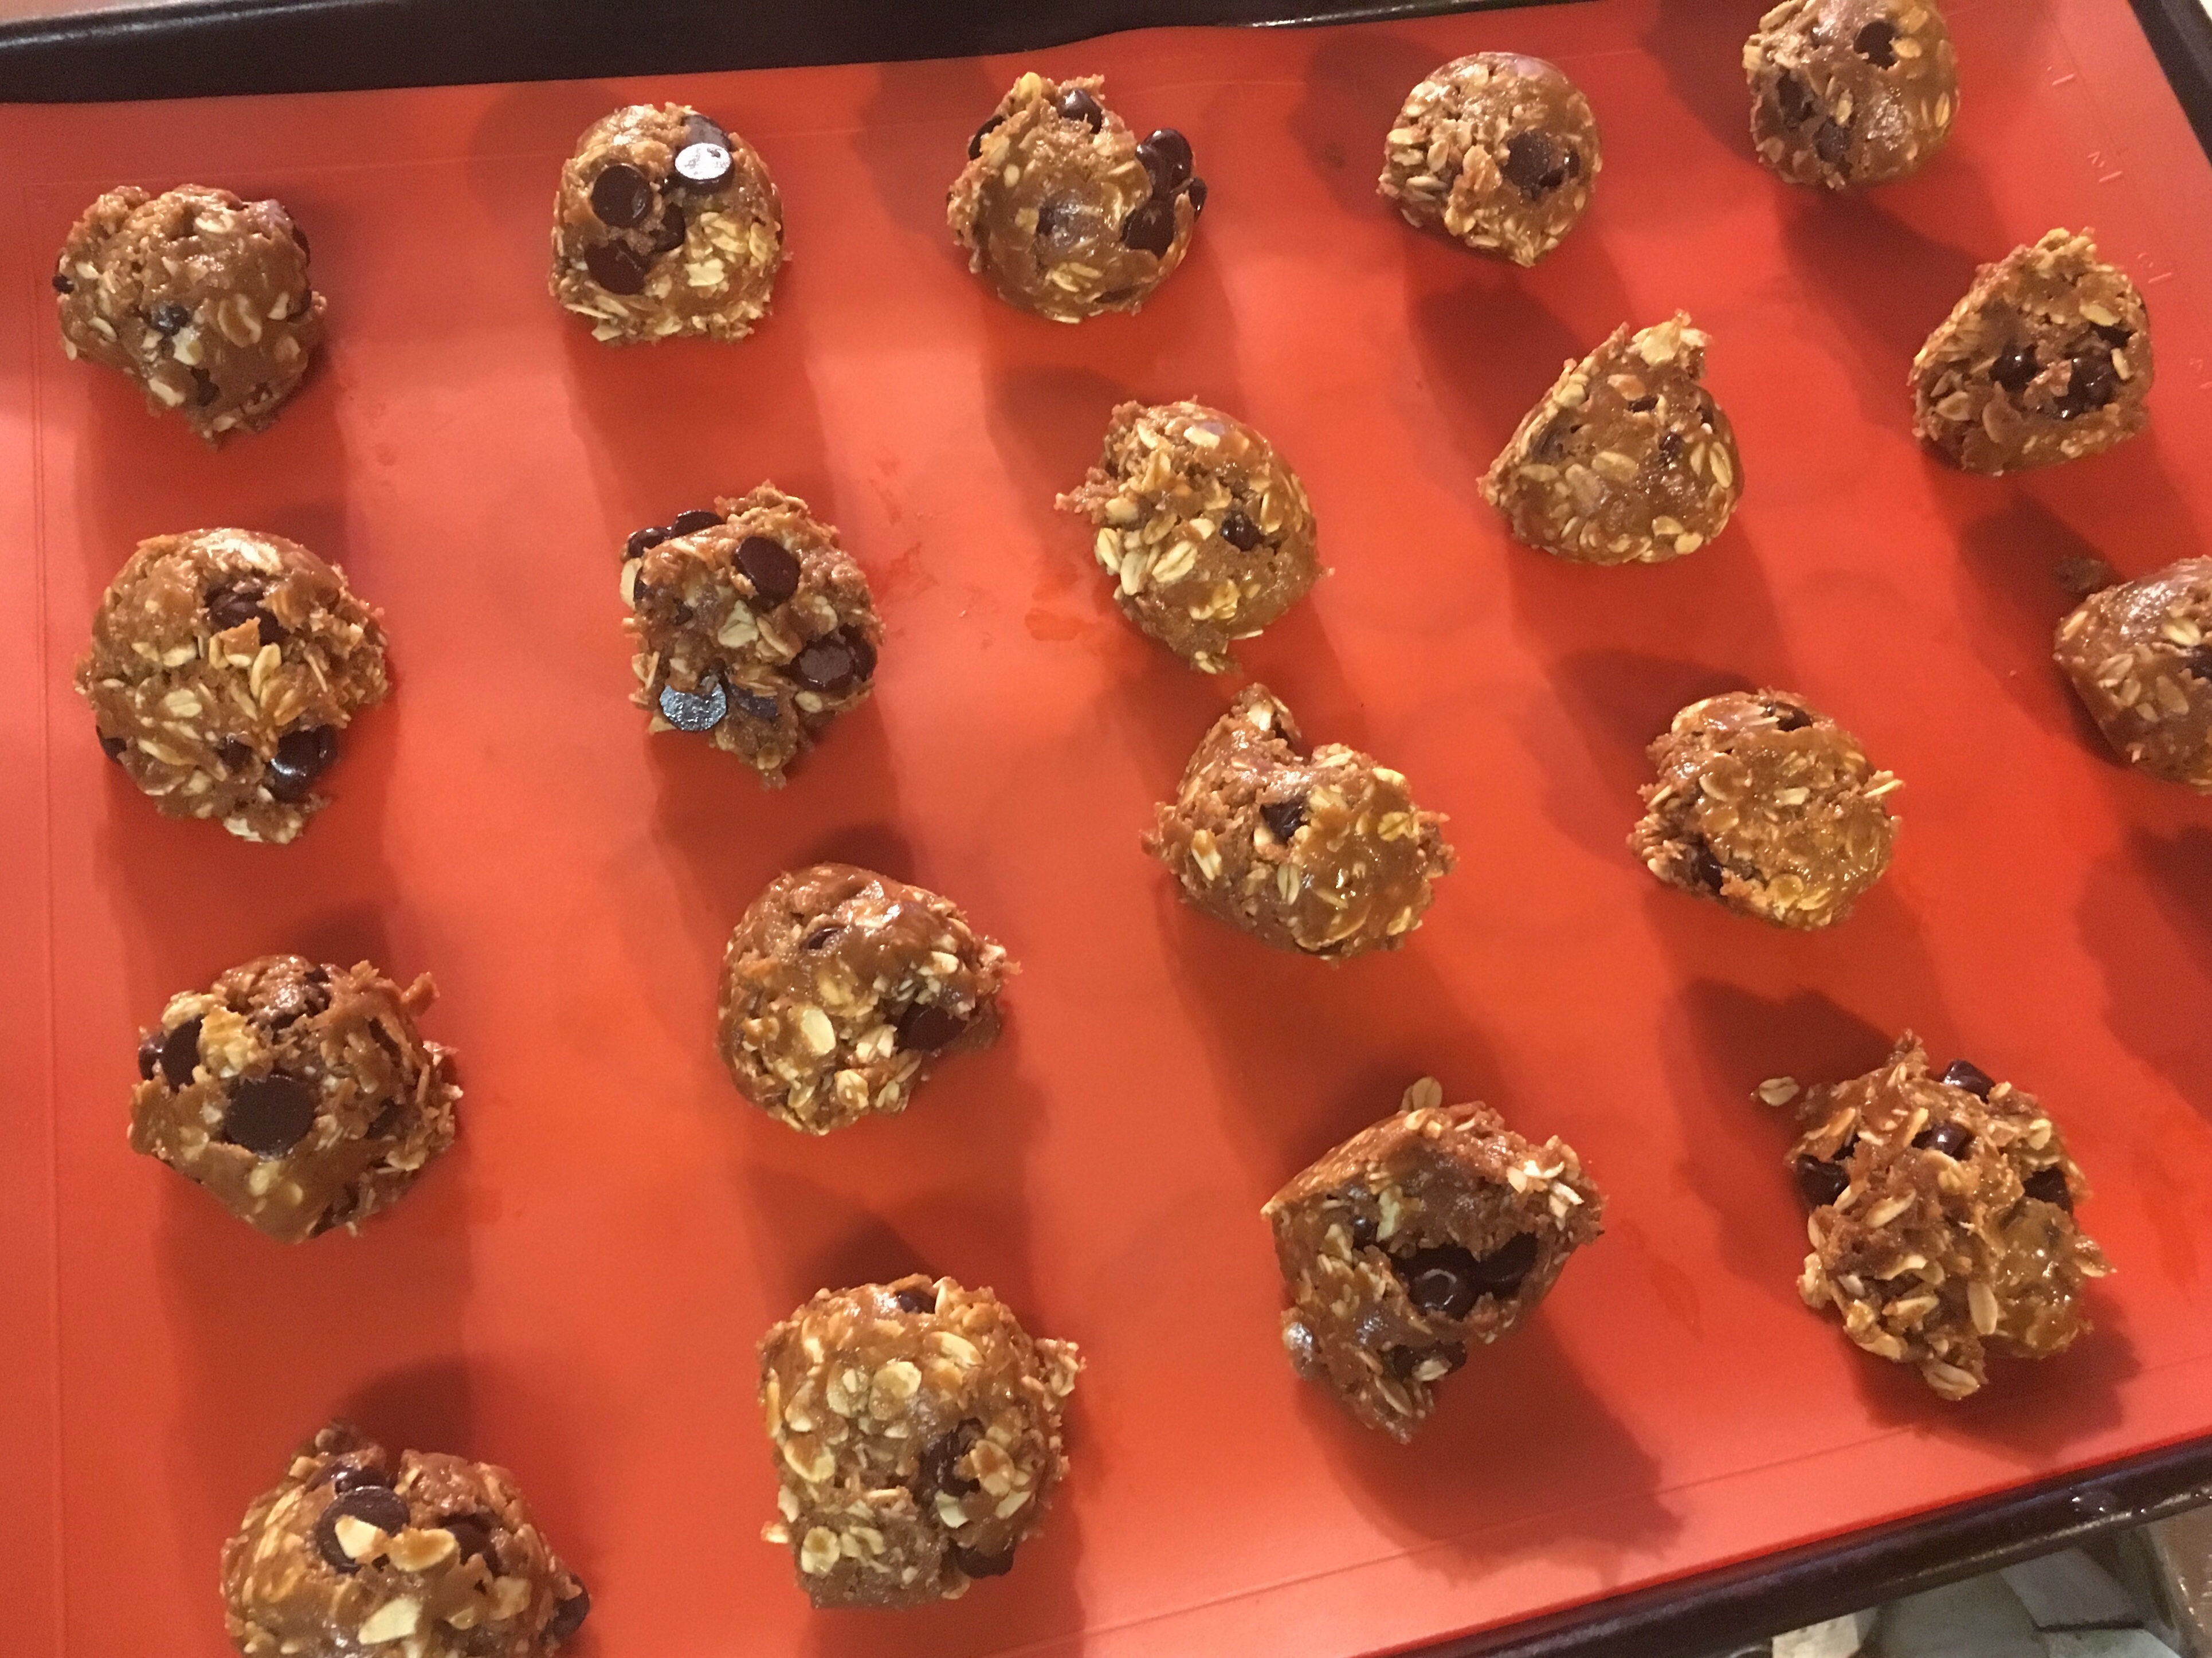 dairy-free lactation cookies